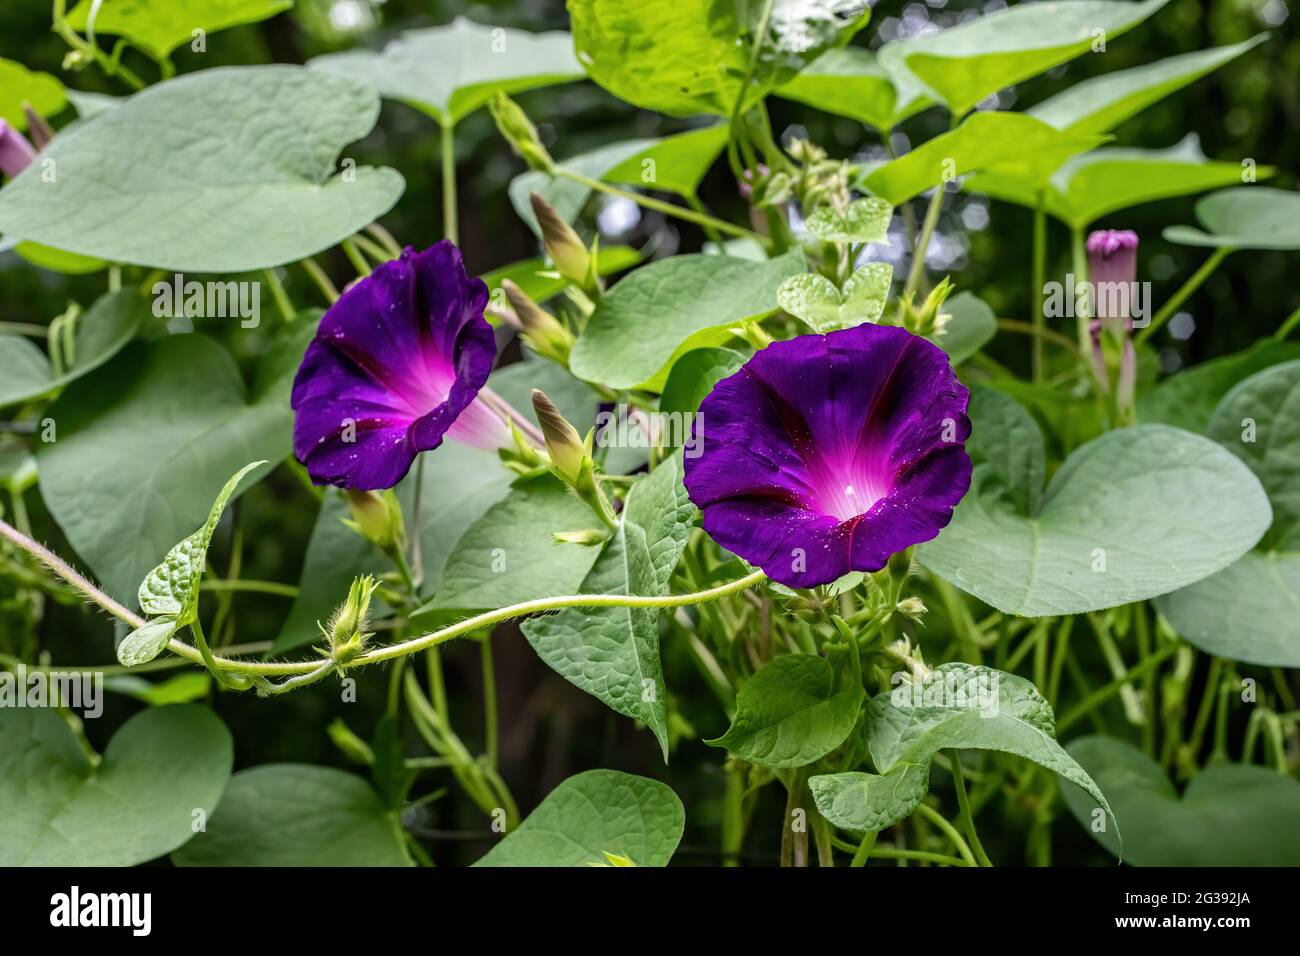 Purple morning glories growing on a vine in a summer garden. Stock Photo